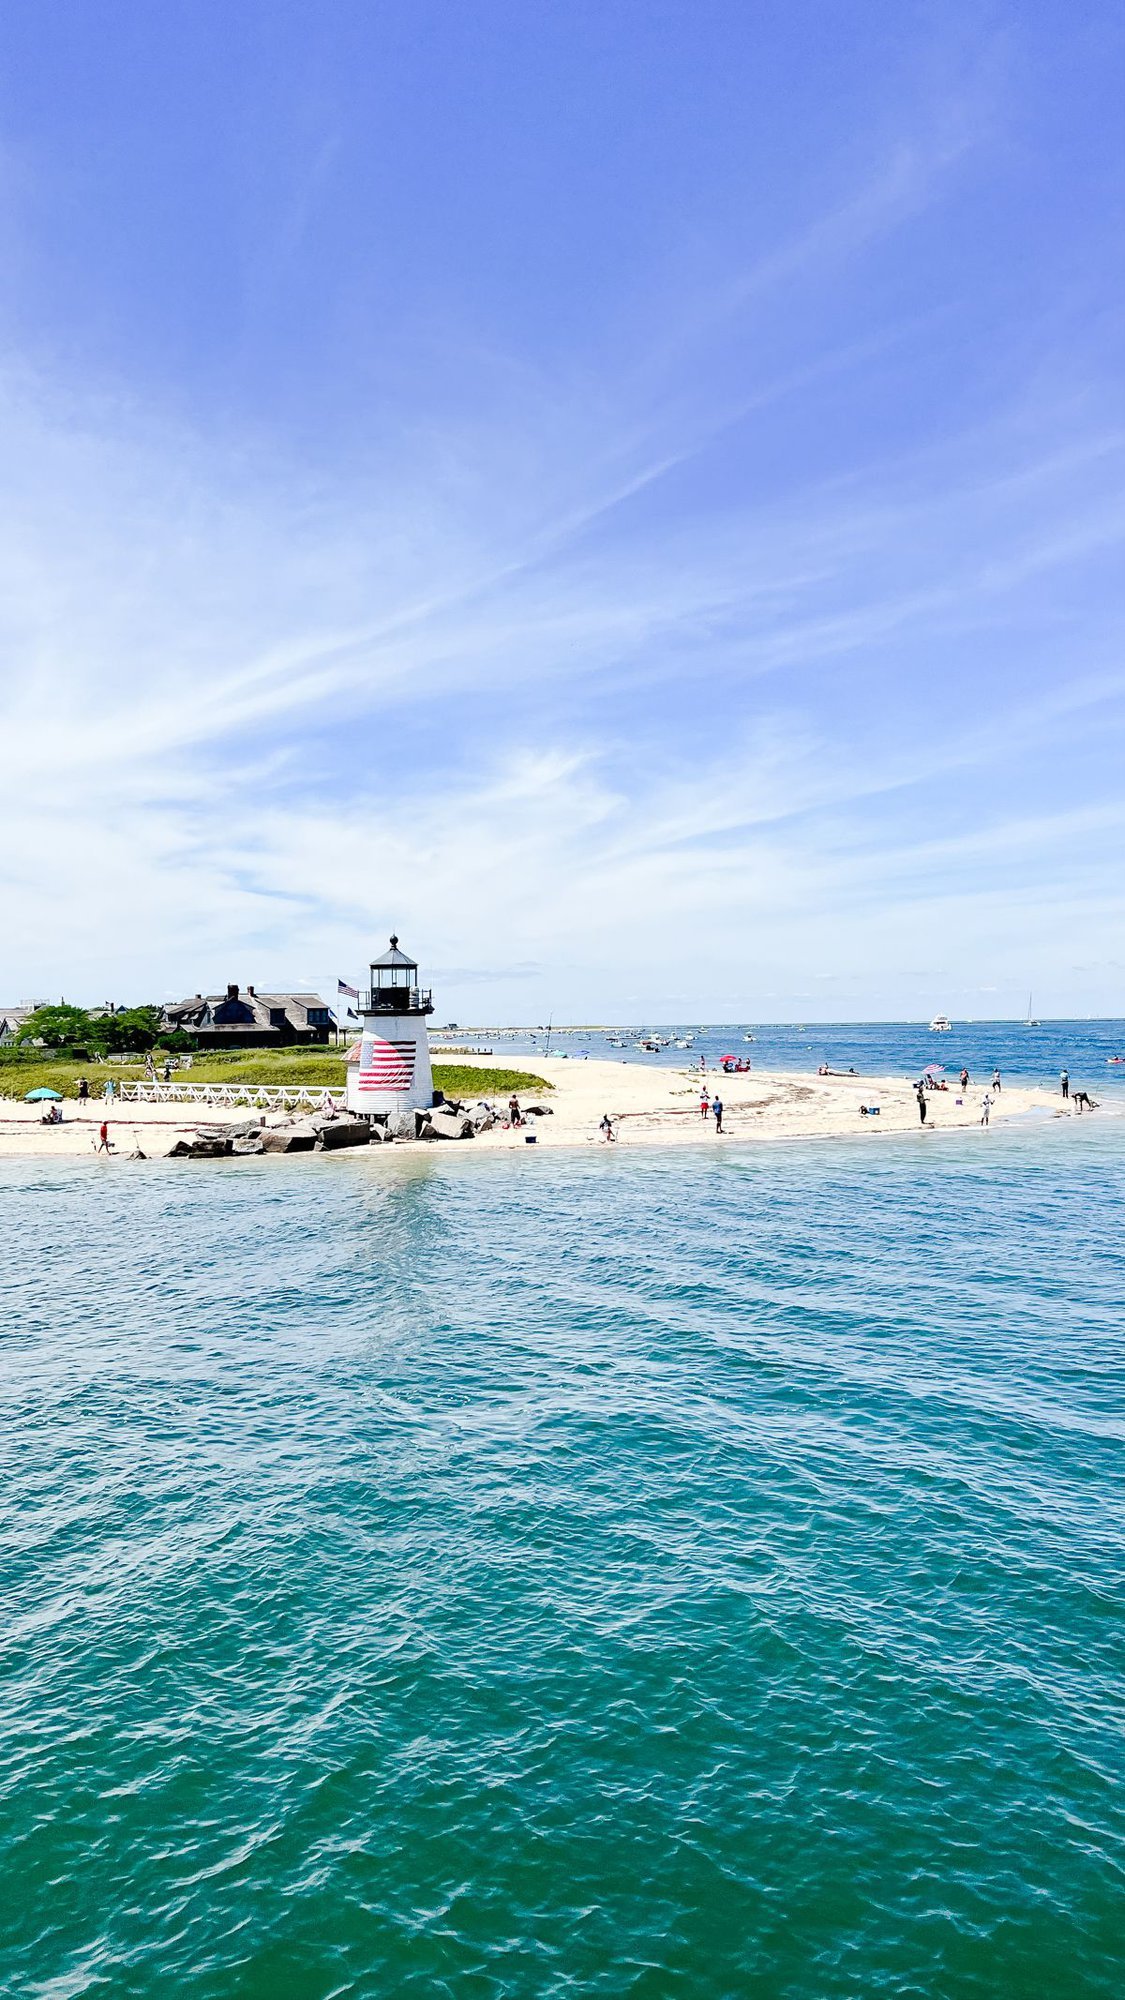 A beach scene, taken from the water, with a lighthouse on the island of Nantucket